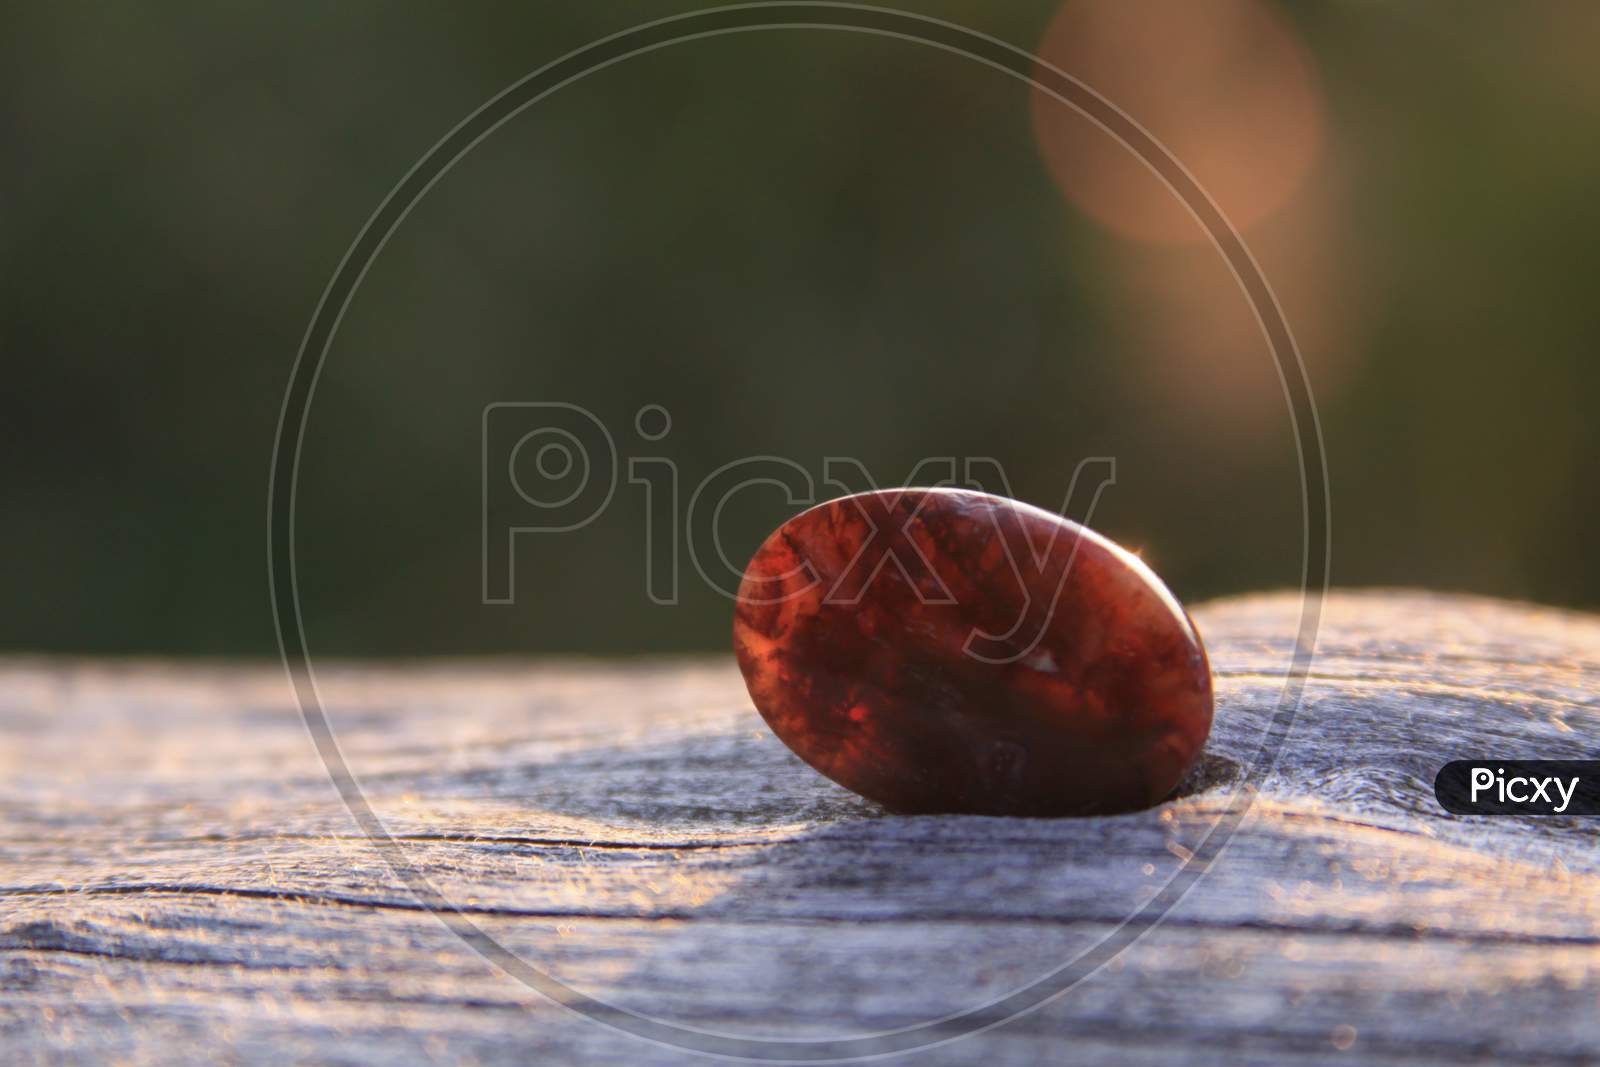 Deep Red Moss Agate On Wood Shining In The Sunlight